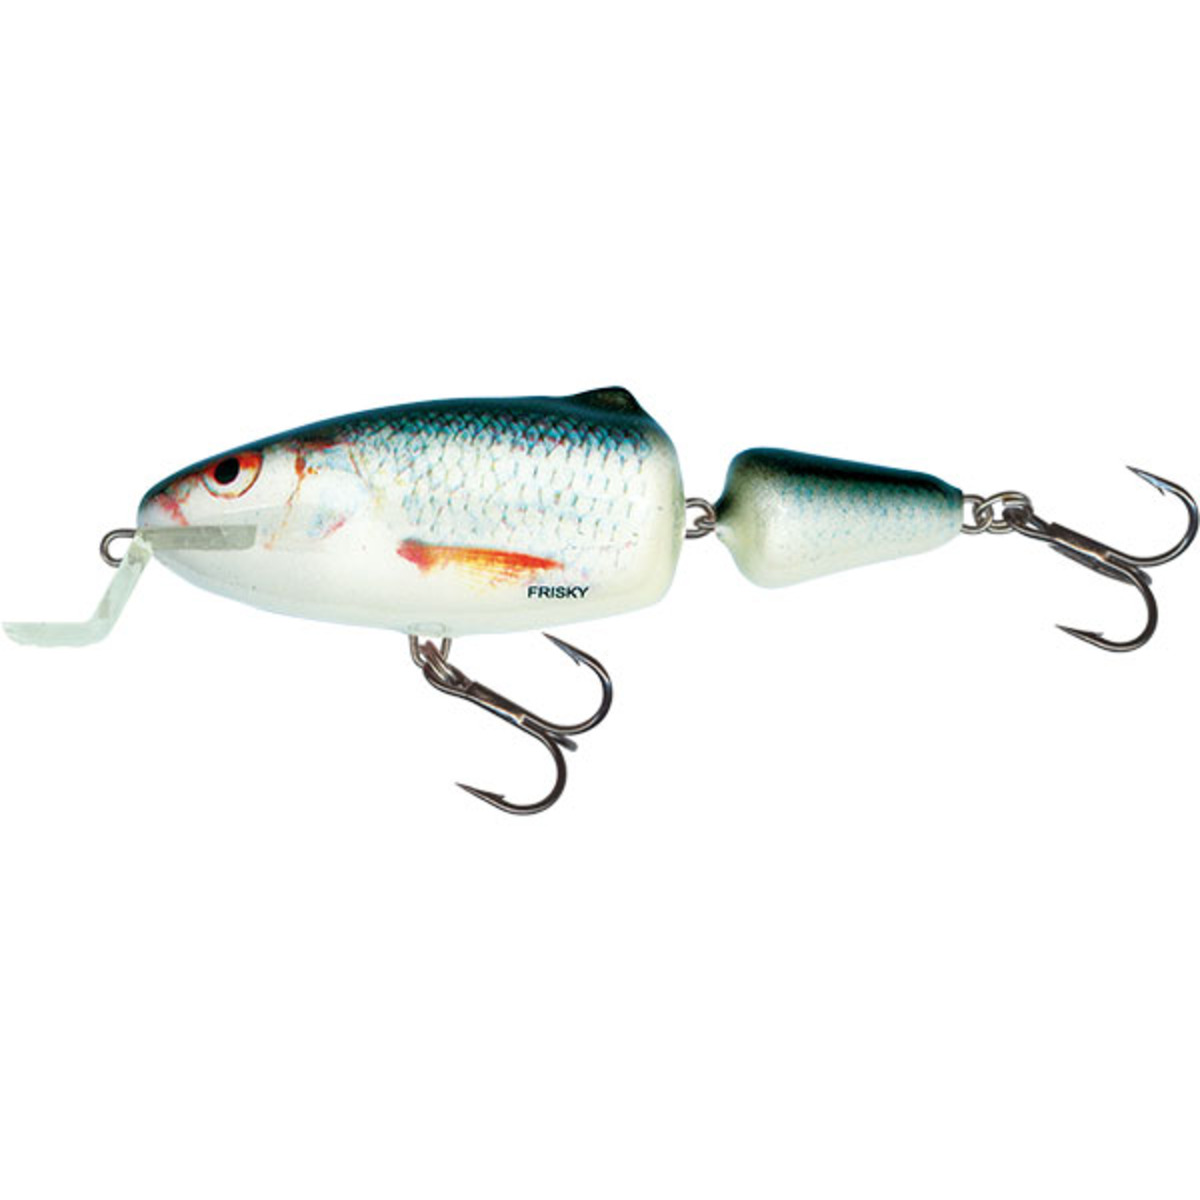 Salmo Frisky Shallow Runner 5 Cm - Real Dace